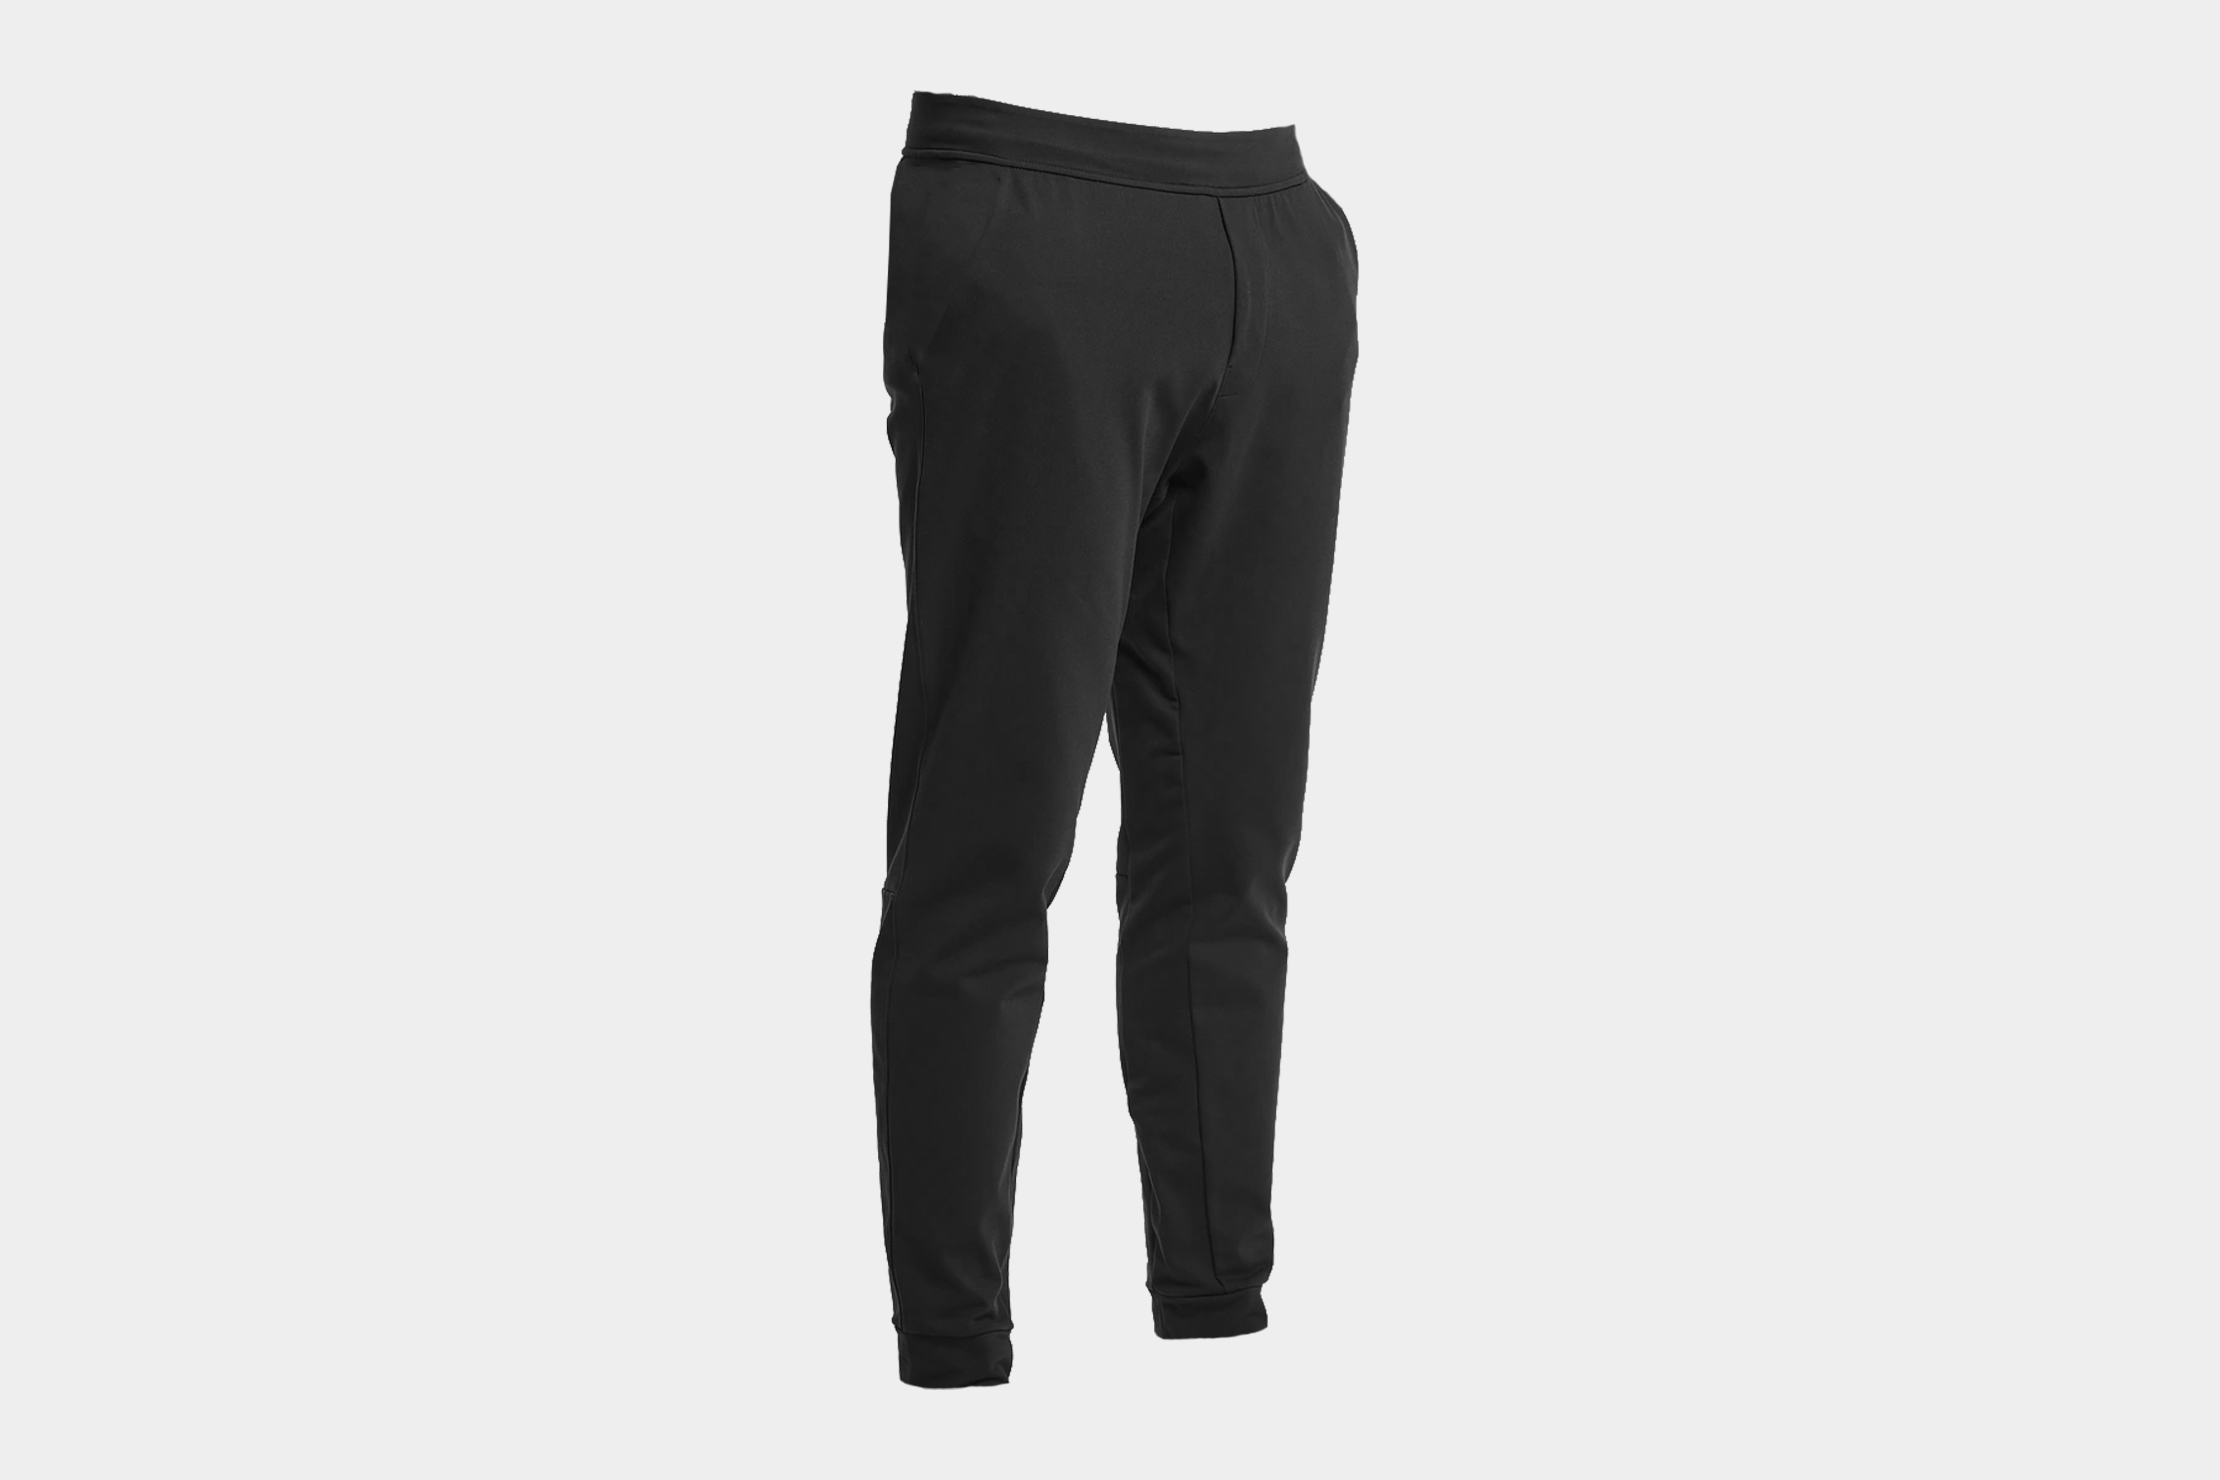 Public Rec Women's All Day Jogger: An Enthusiastic Review